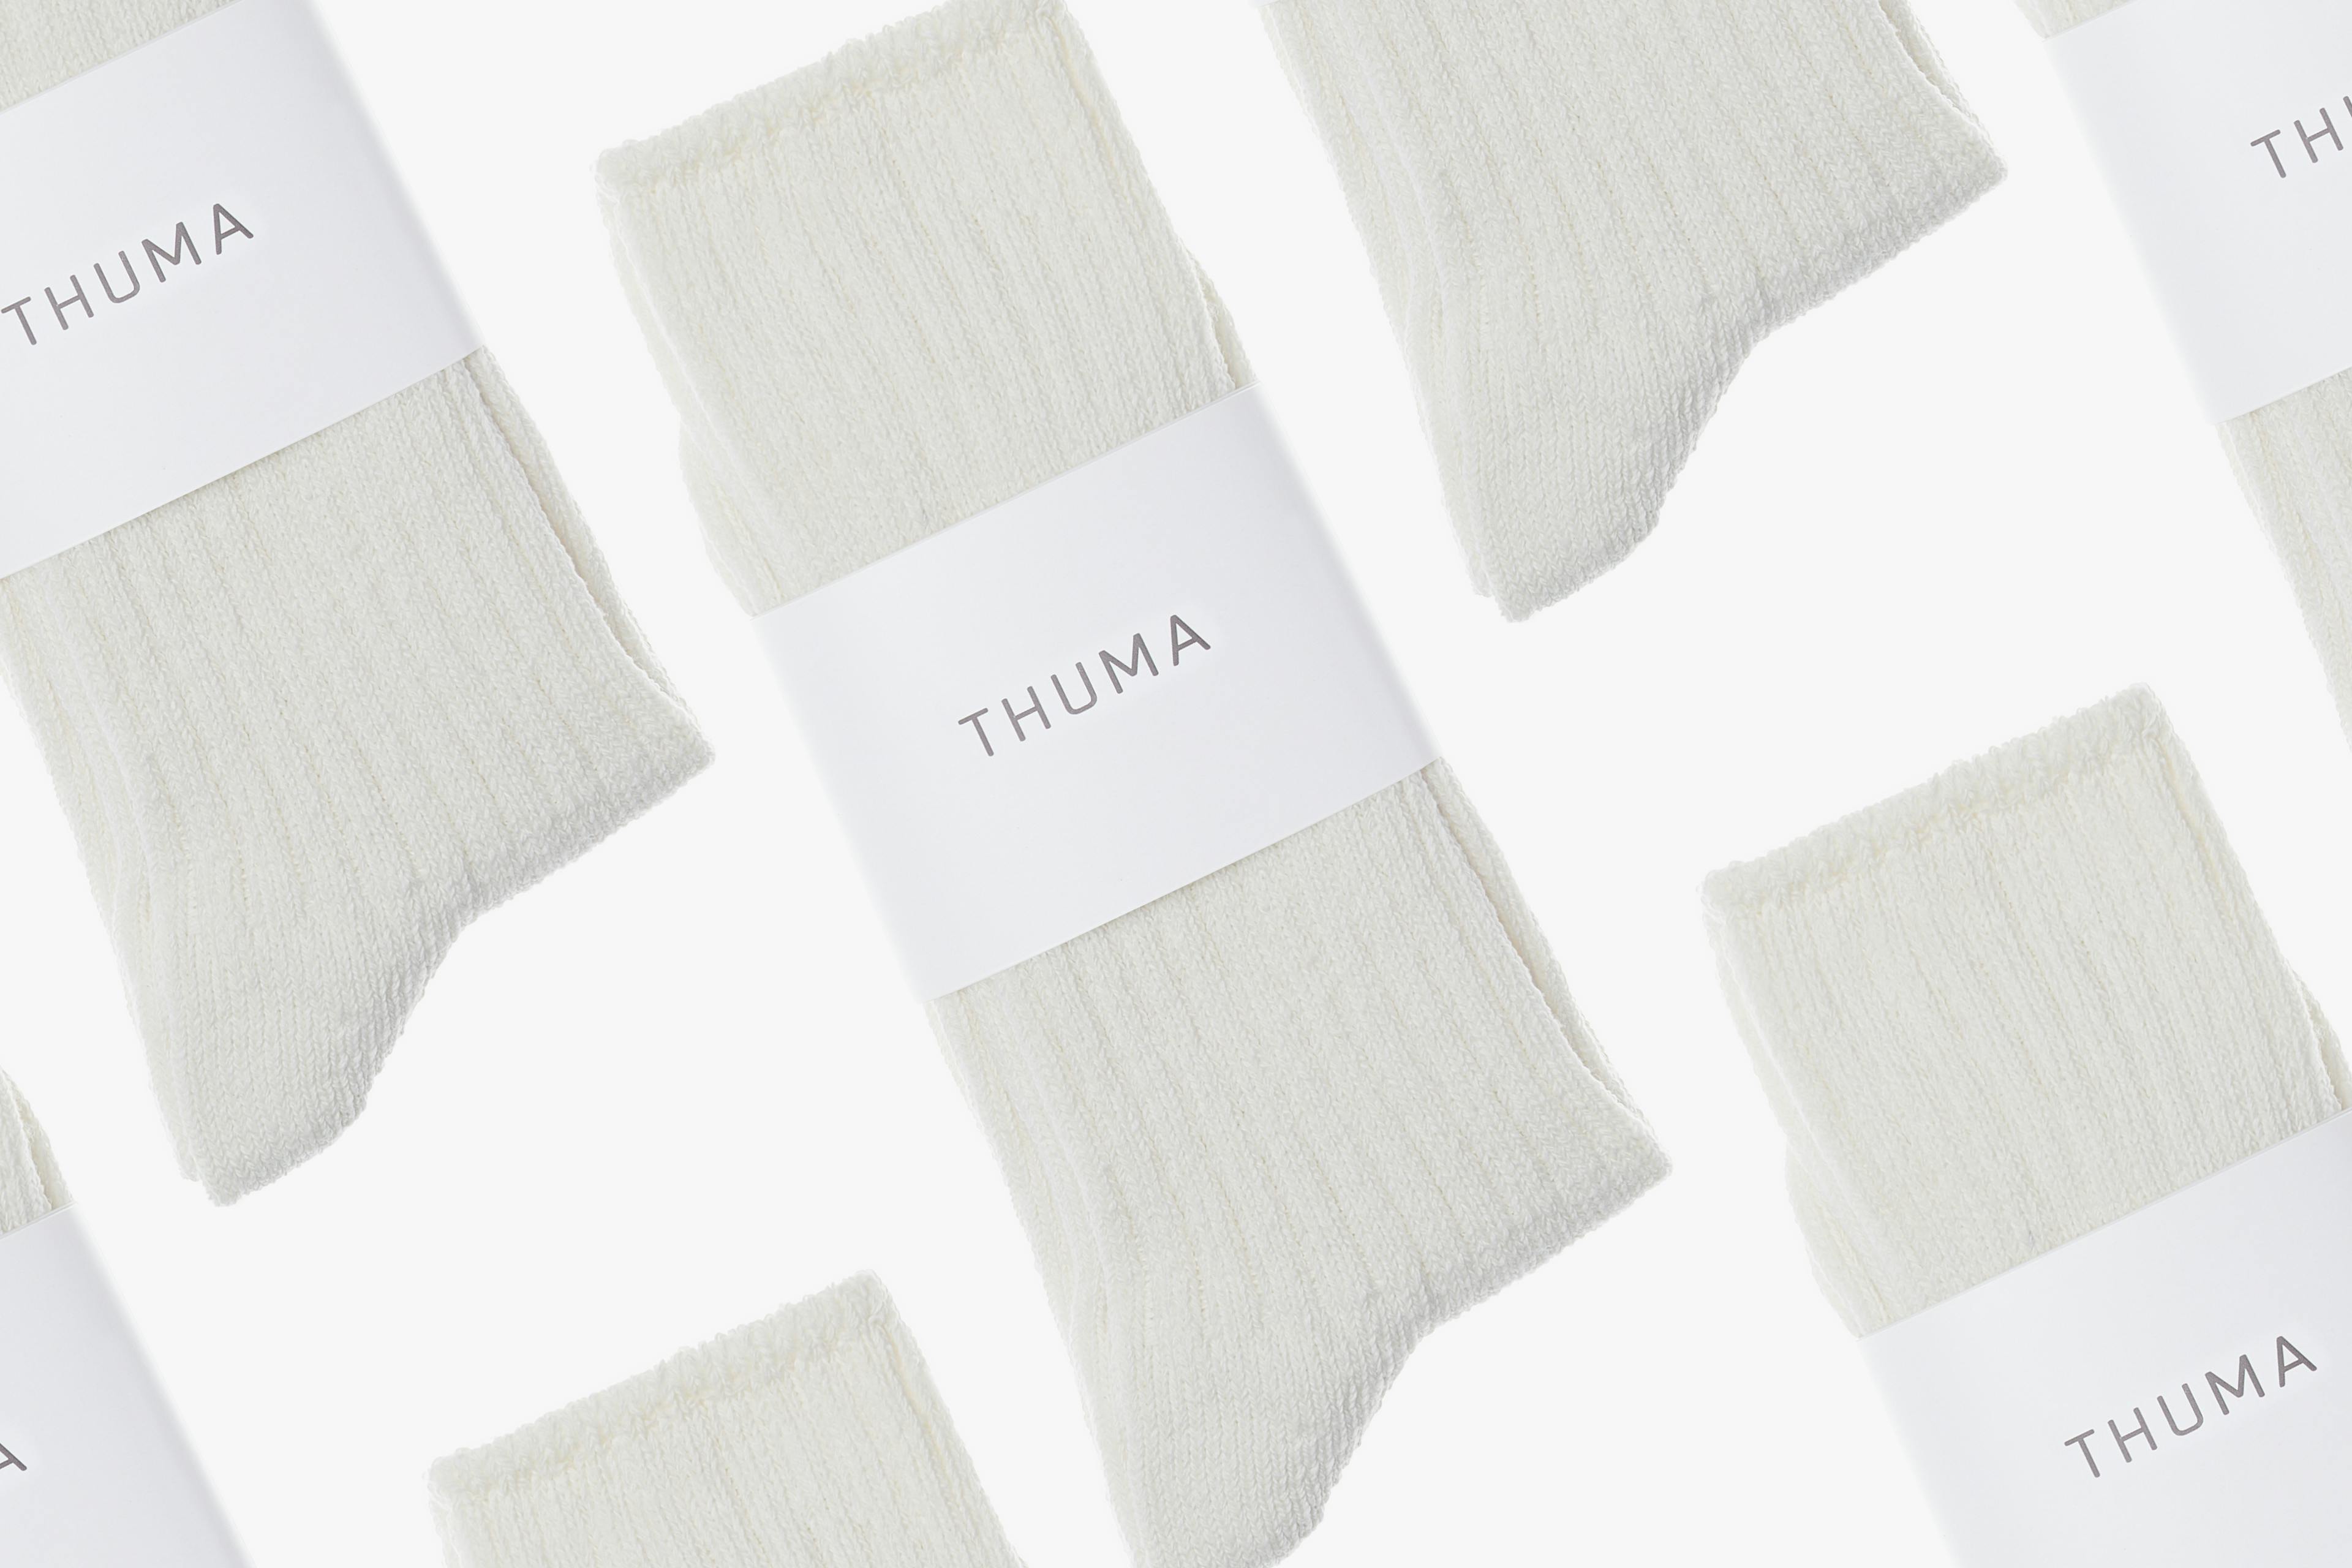 Close-Up View of Thuma Lounge & Leisure Socks in Natural White Color